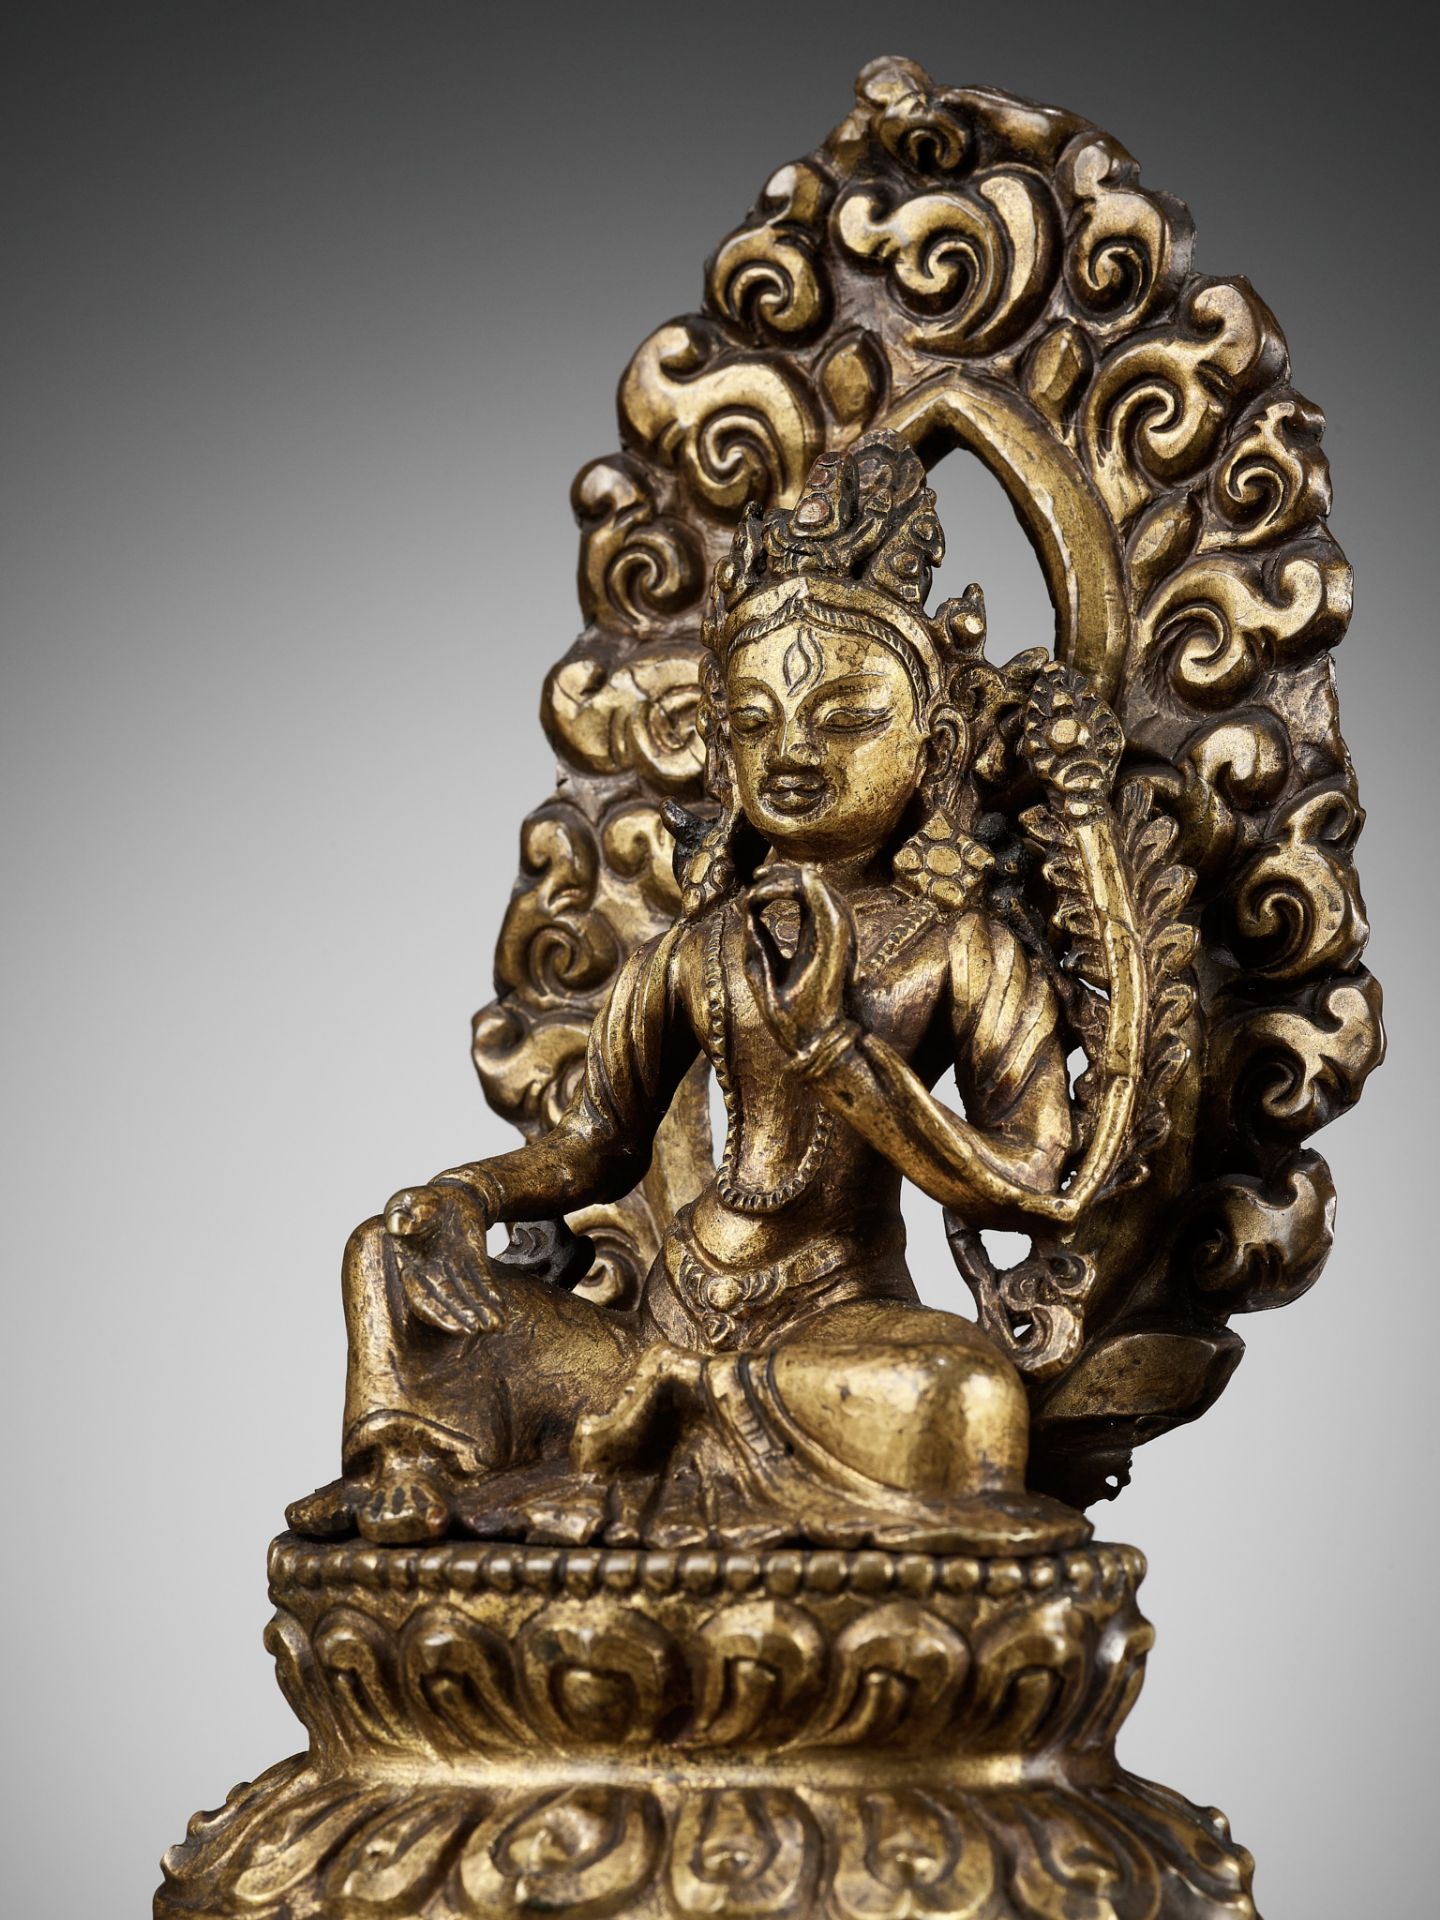 A GILT COPPER REPOUSSE FIGURE OF TARA, NEPAL, 18TH-19TH CENTURY - Image 2 of 15